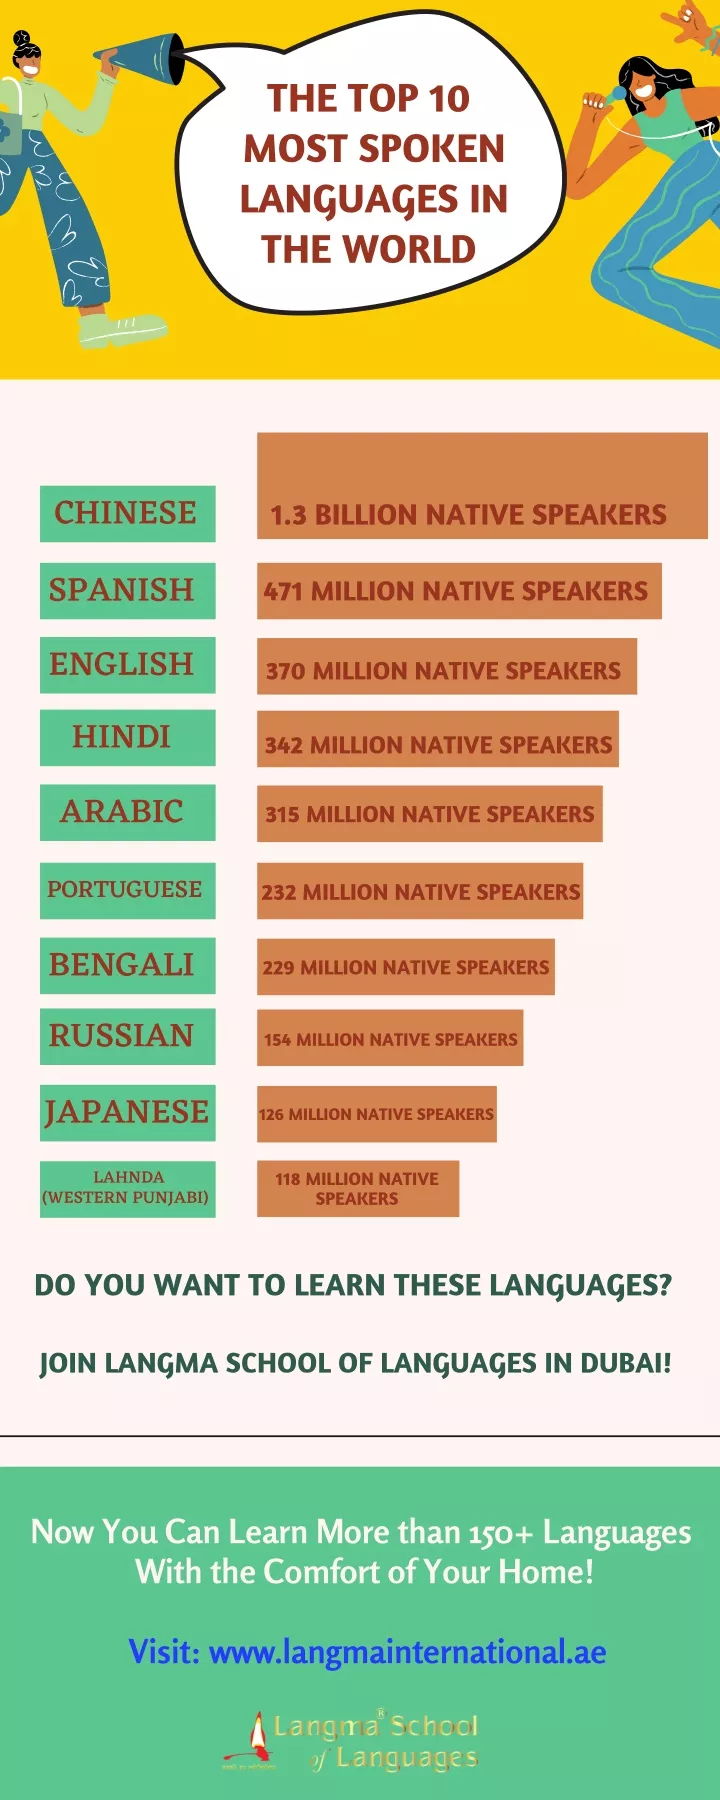 the top 10 most spoken languages in the world